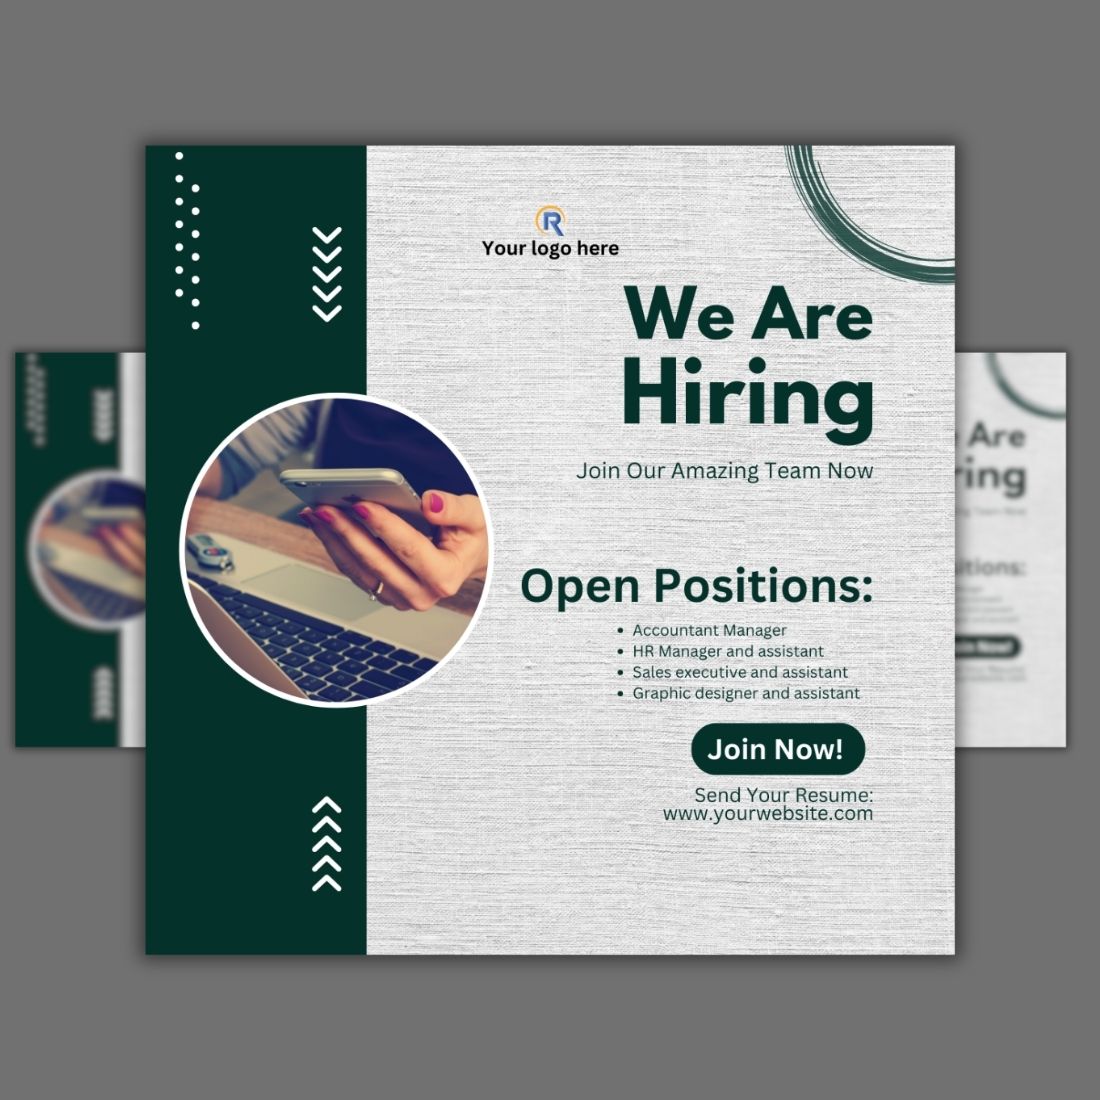 1 Instagram Sized Canva Hiring Design Template - $4 preview image.